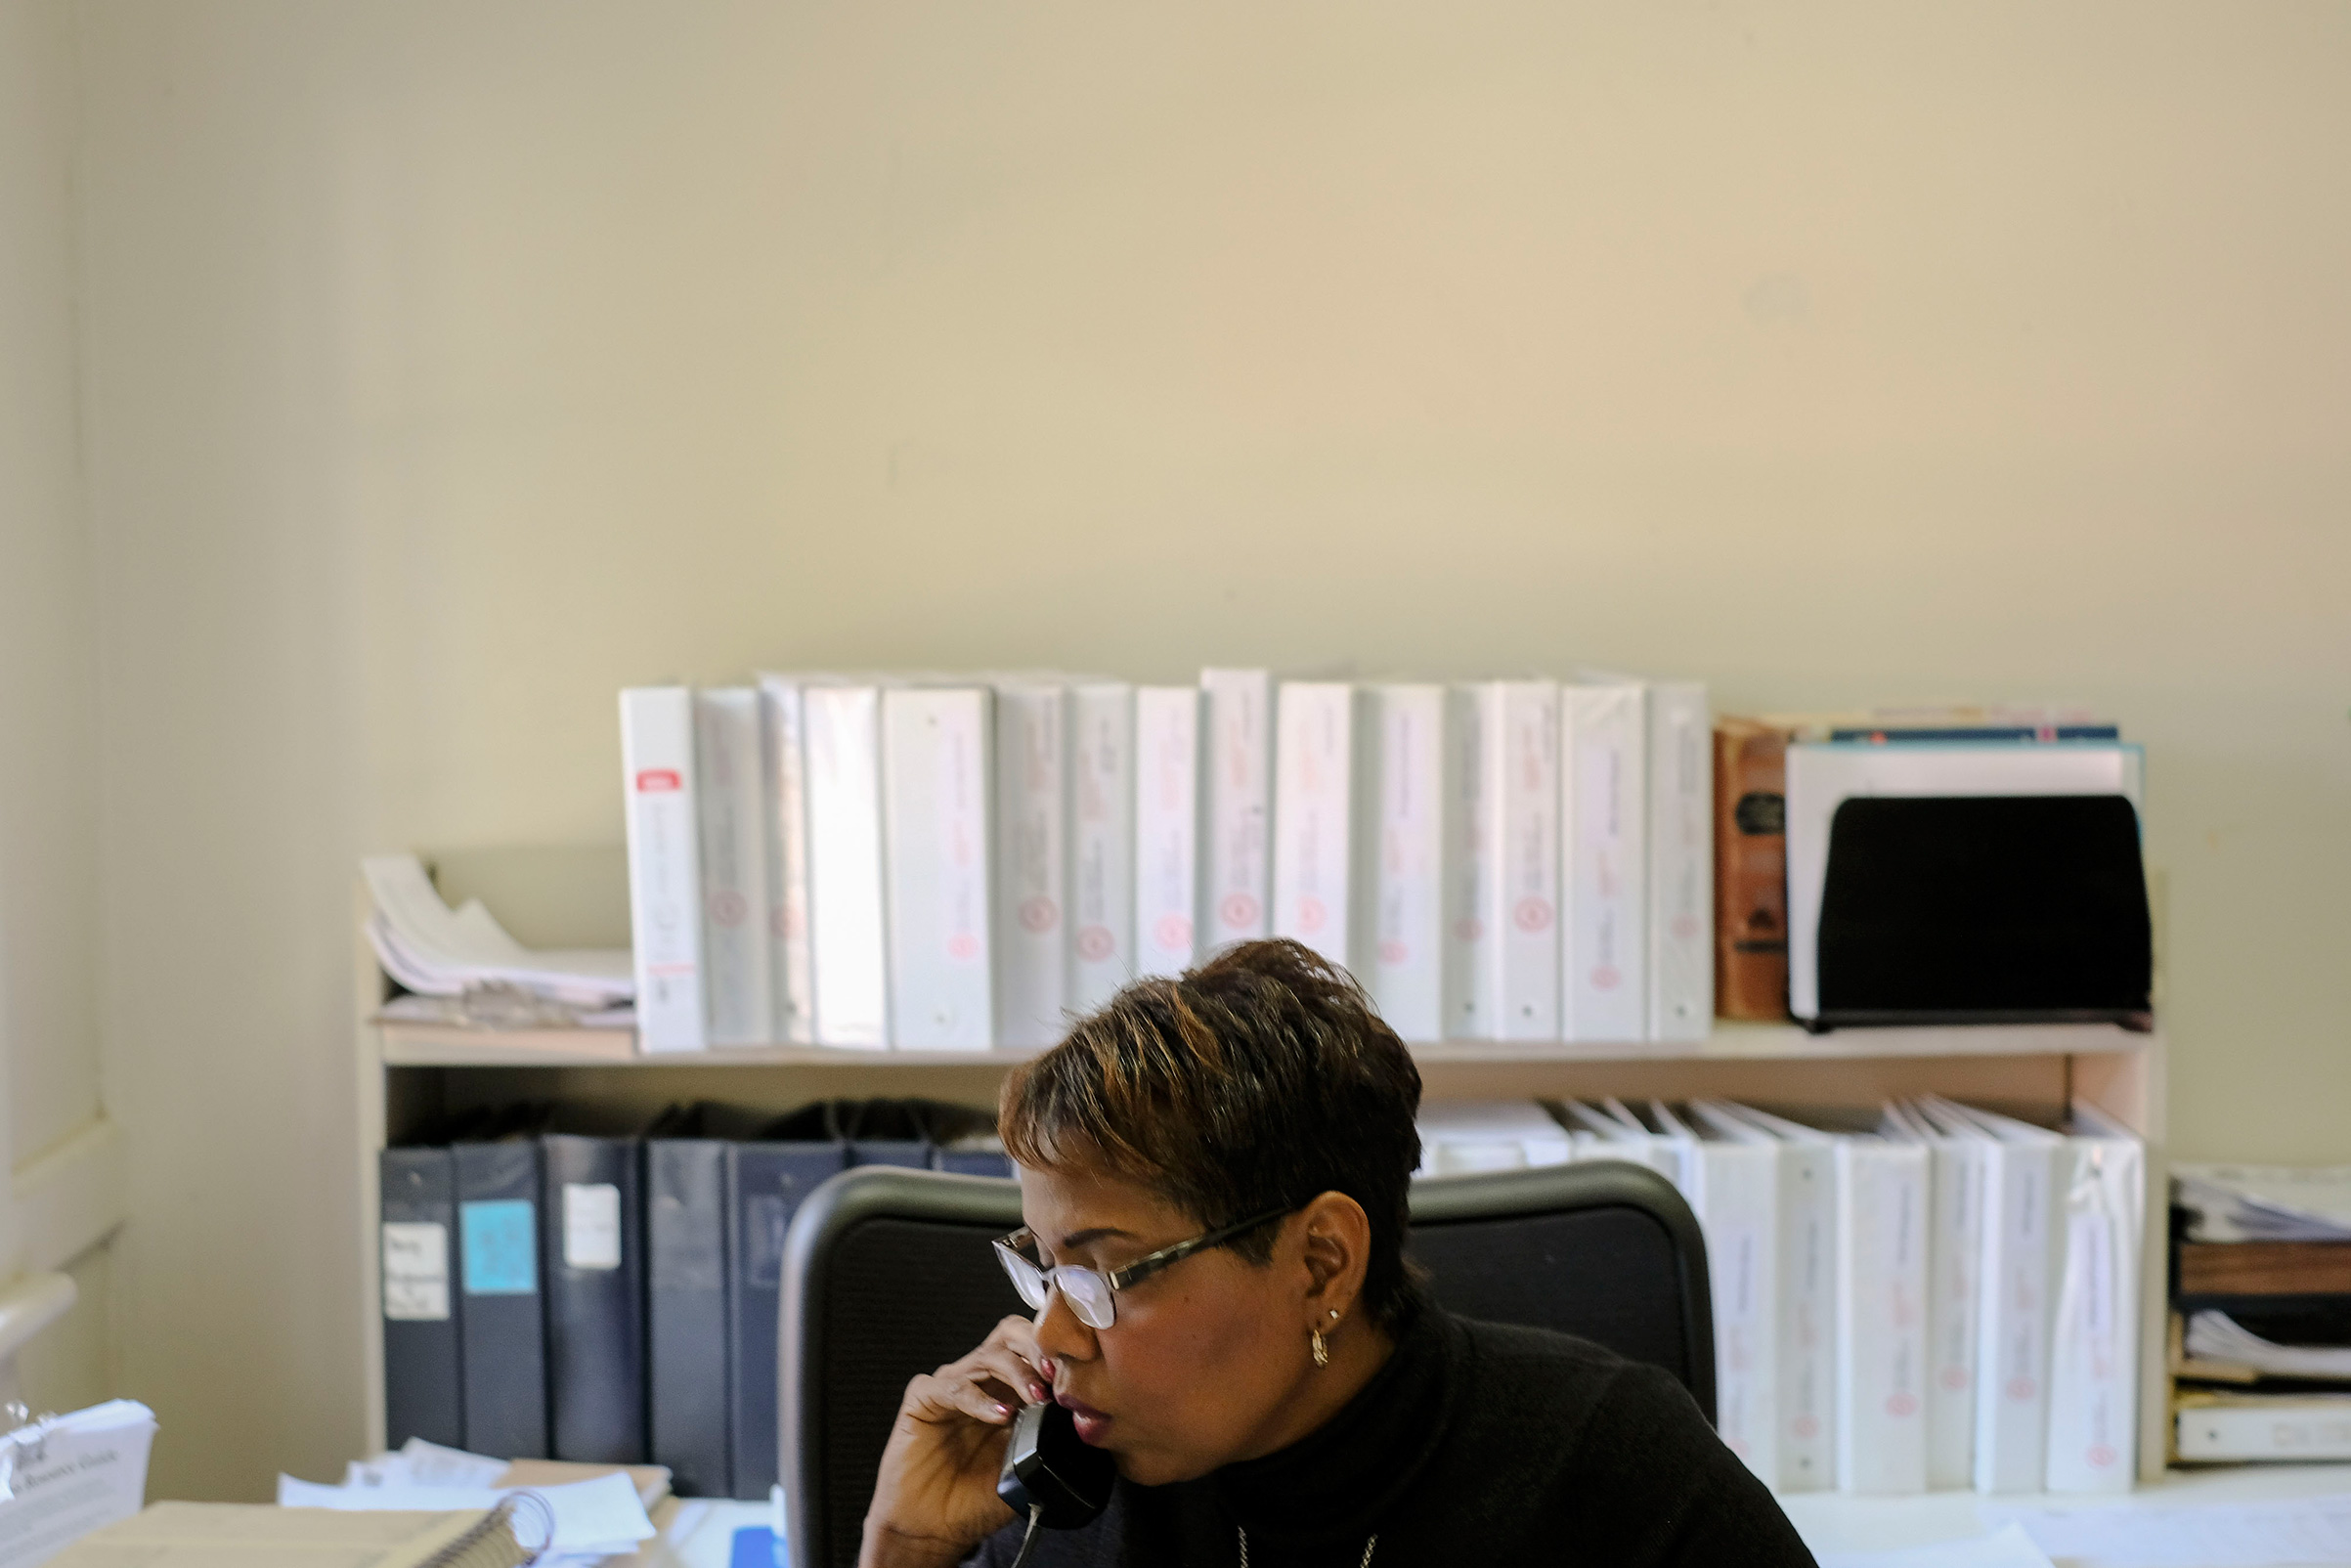 Susan Cooper coordinates voter calls at the Urban League of Greater Columbus, which has turned into an election day command unit for getting voters to the polls, in Columbus, Ga. on Nov. 6, 2018. (Gabriella Demczuk for TIME)